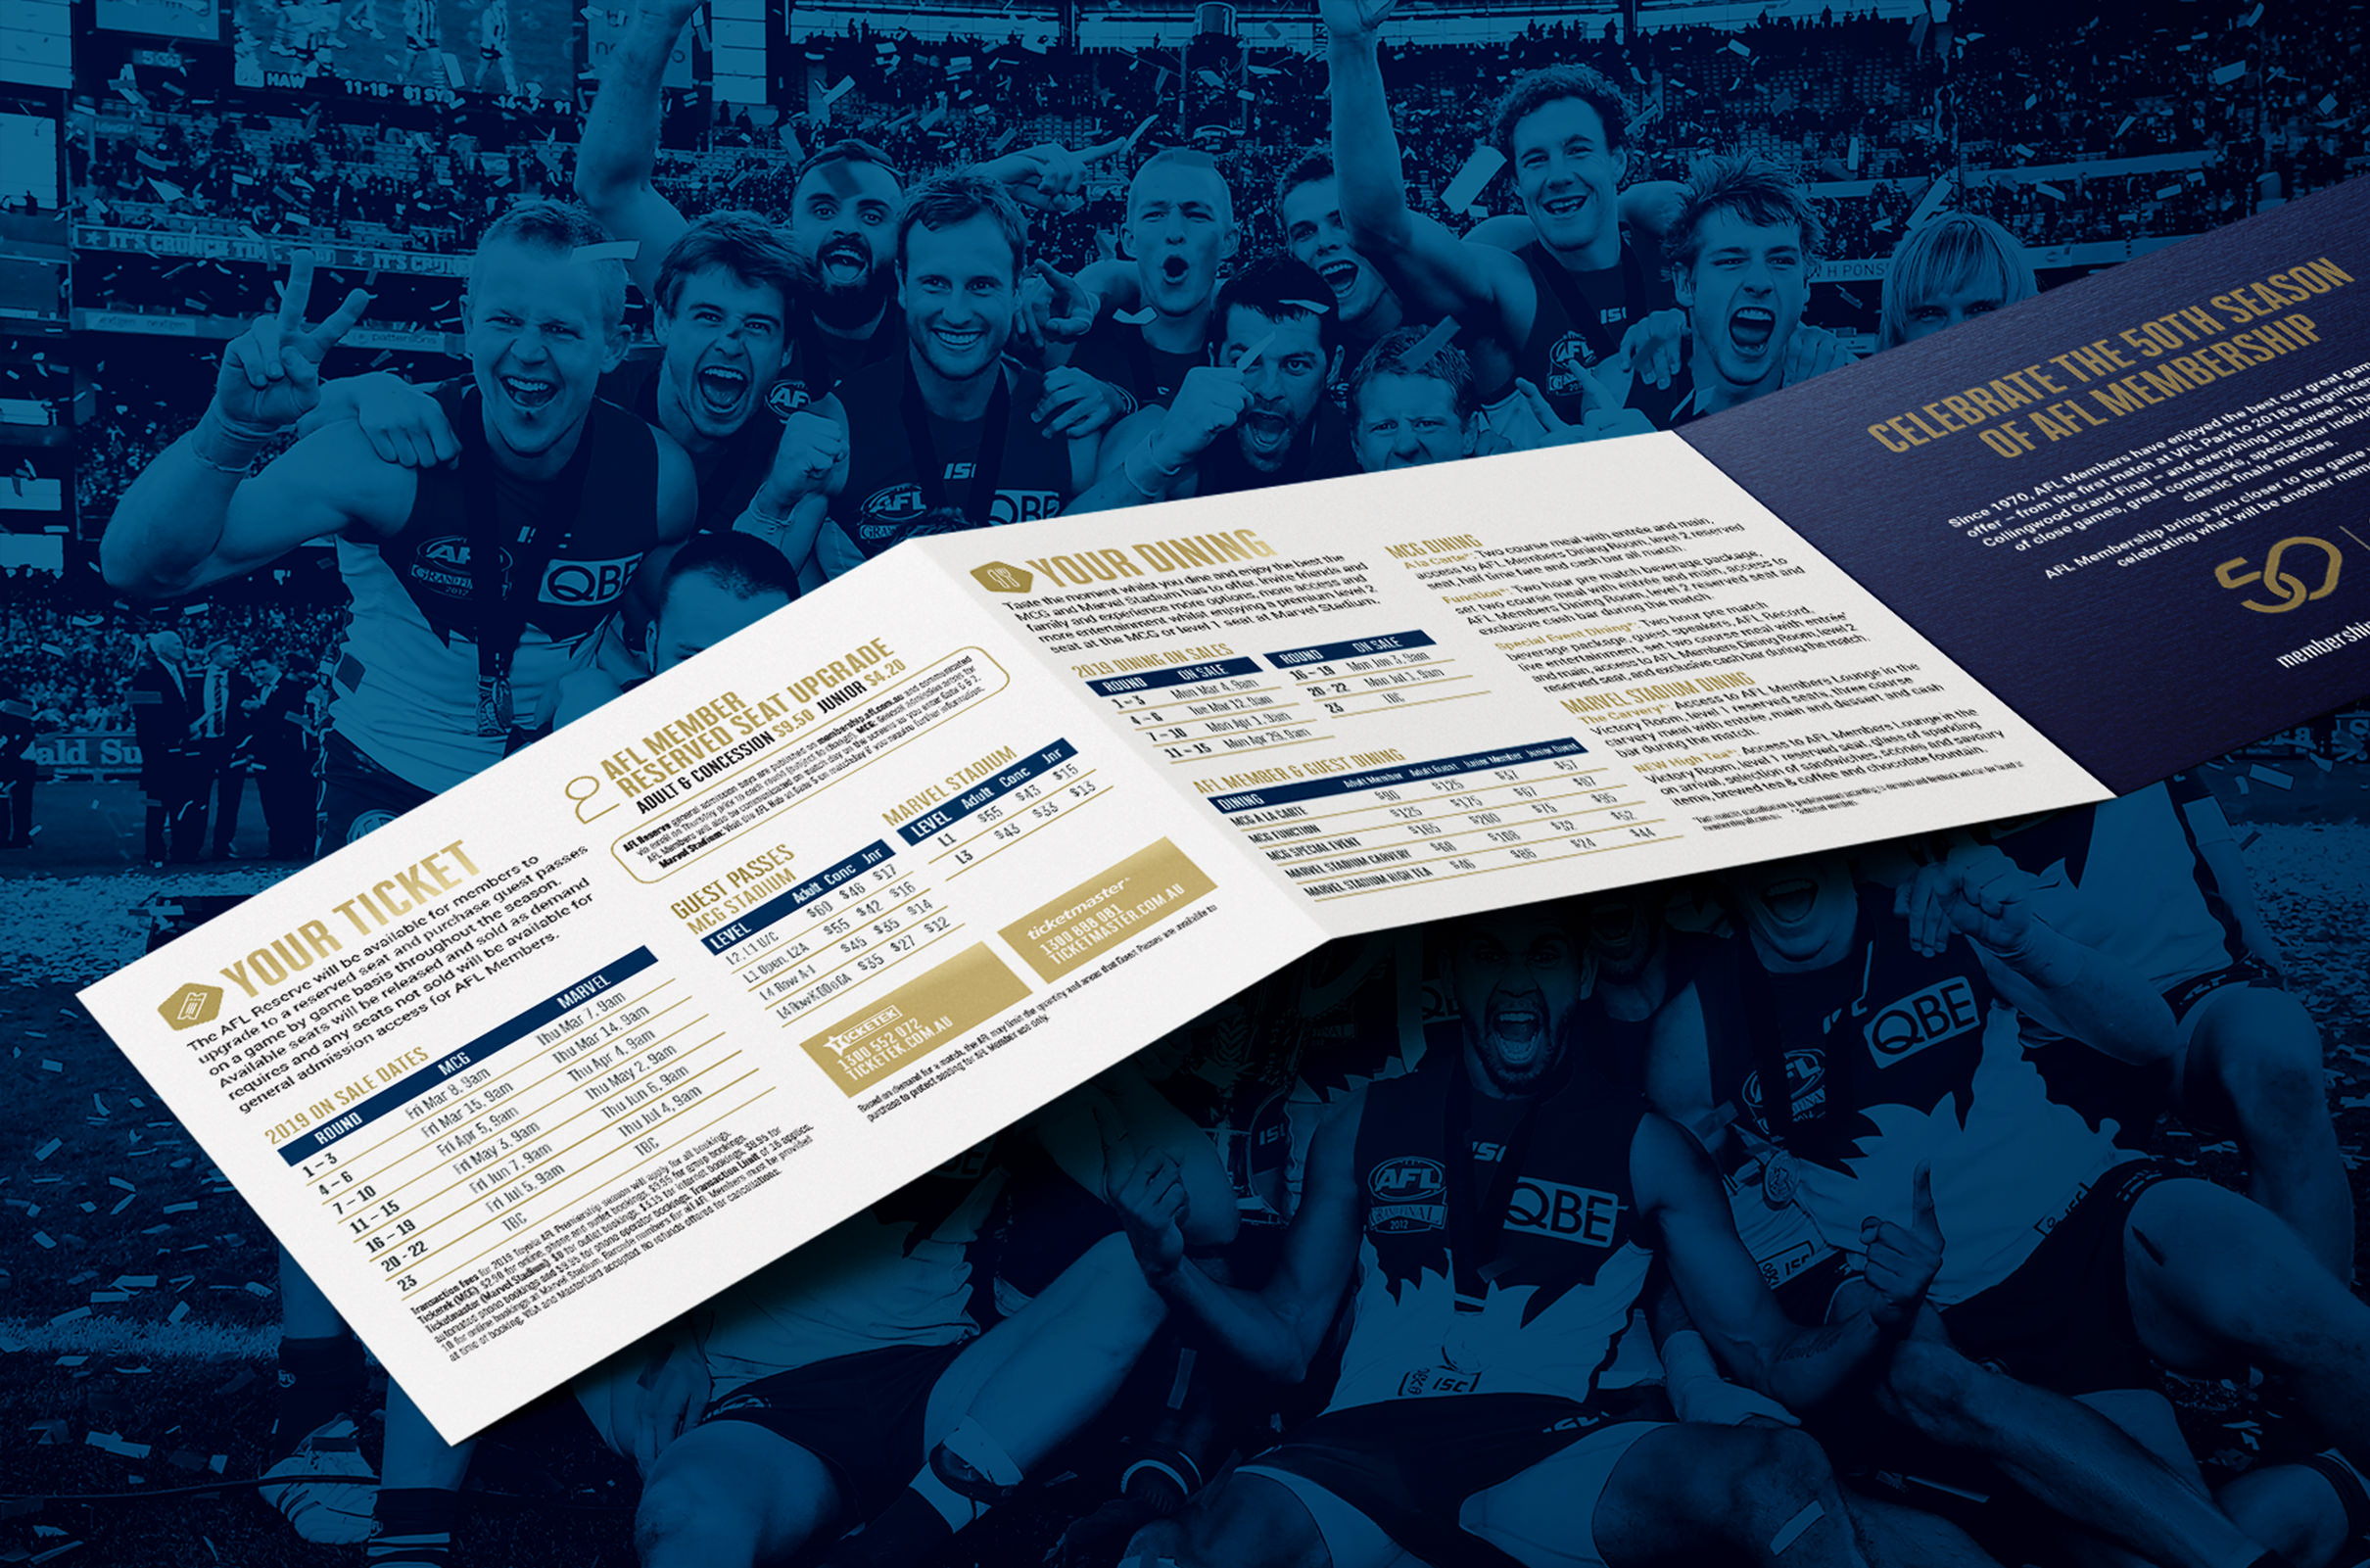 AFL_IMAGE-BANNER-BLOCK_ONE-ROW_2420x1850 copy